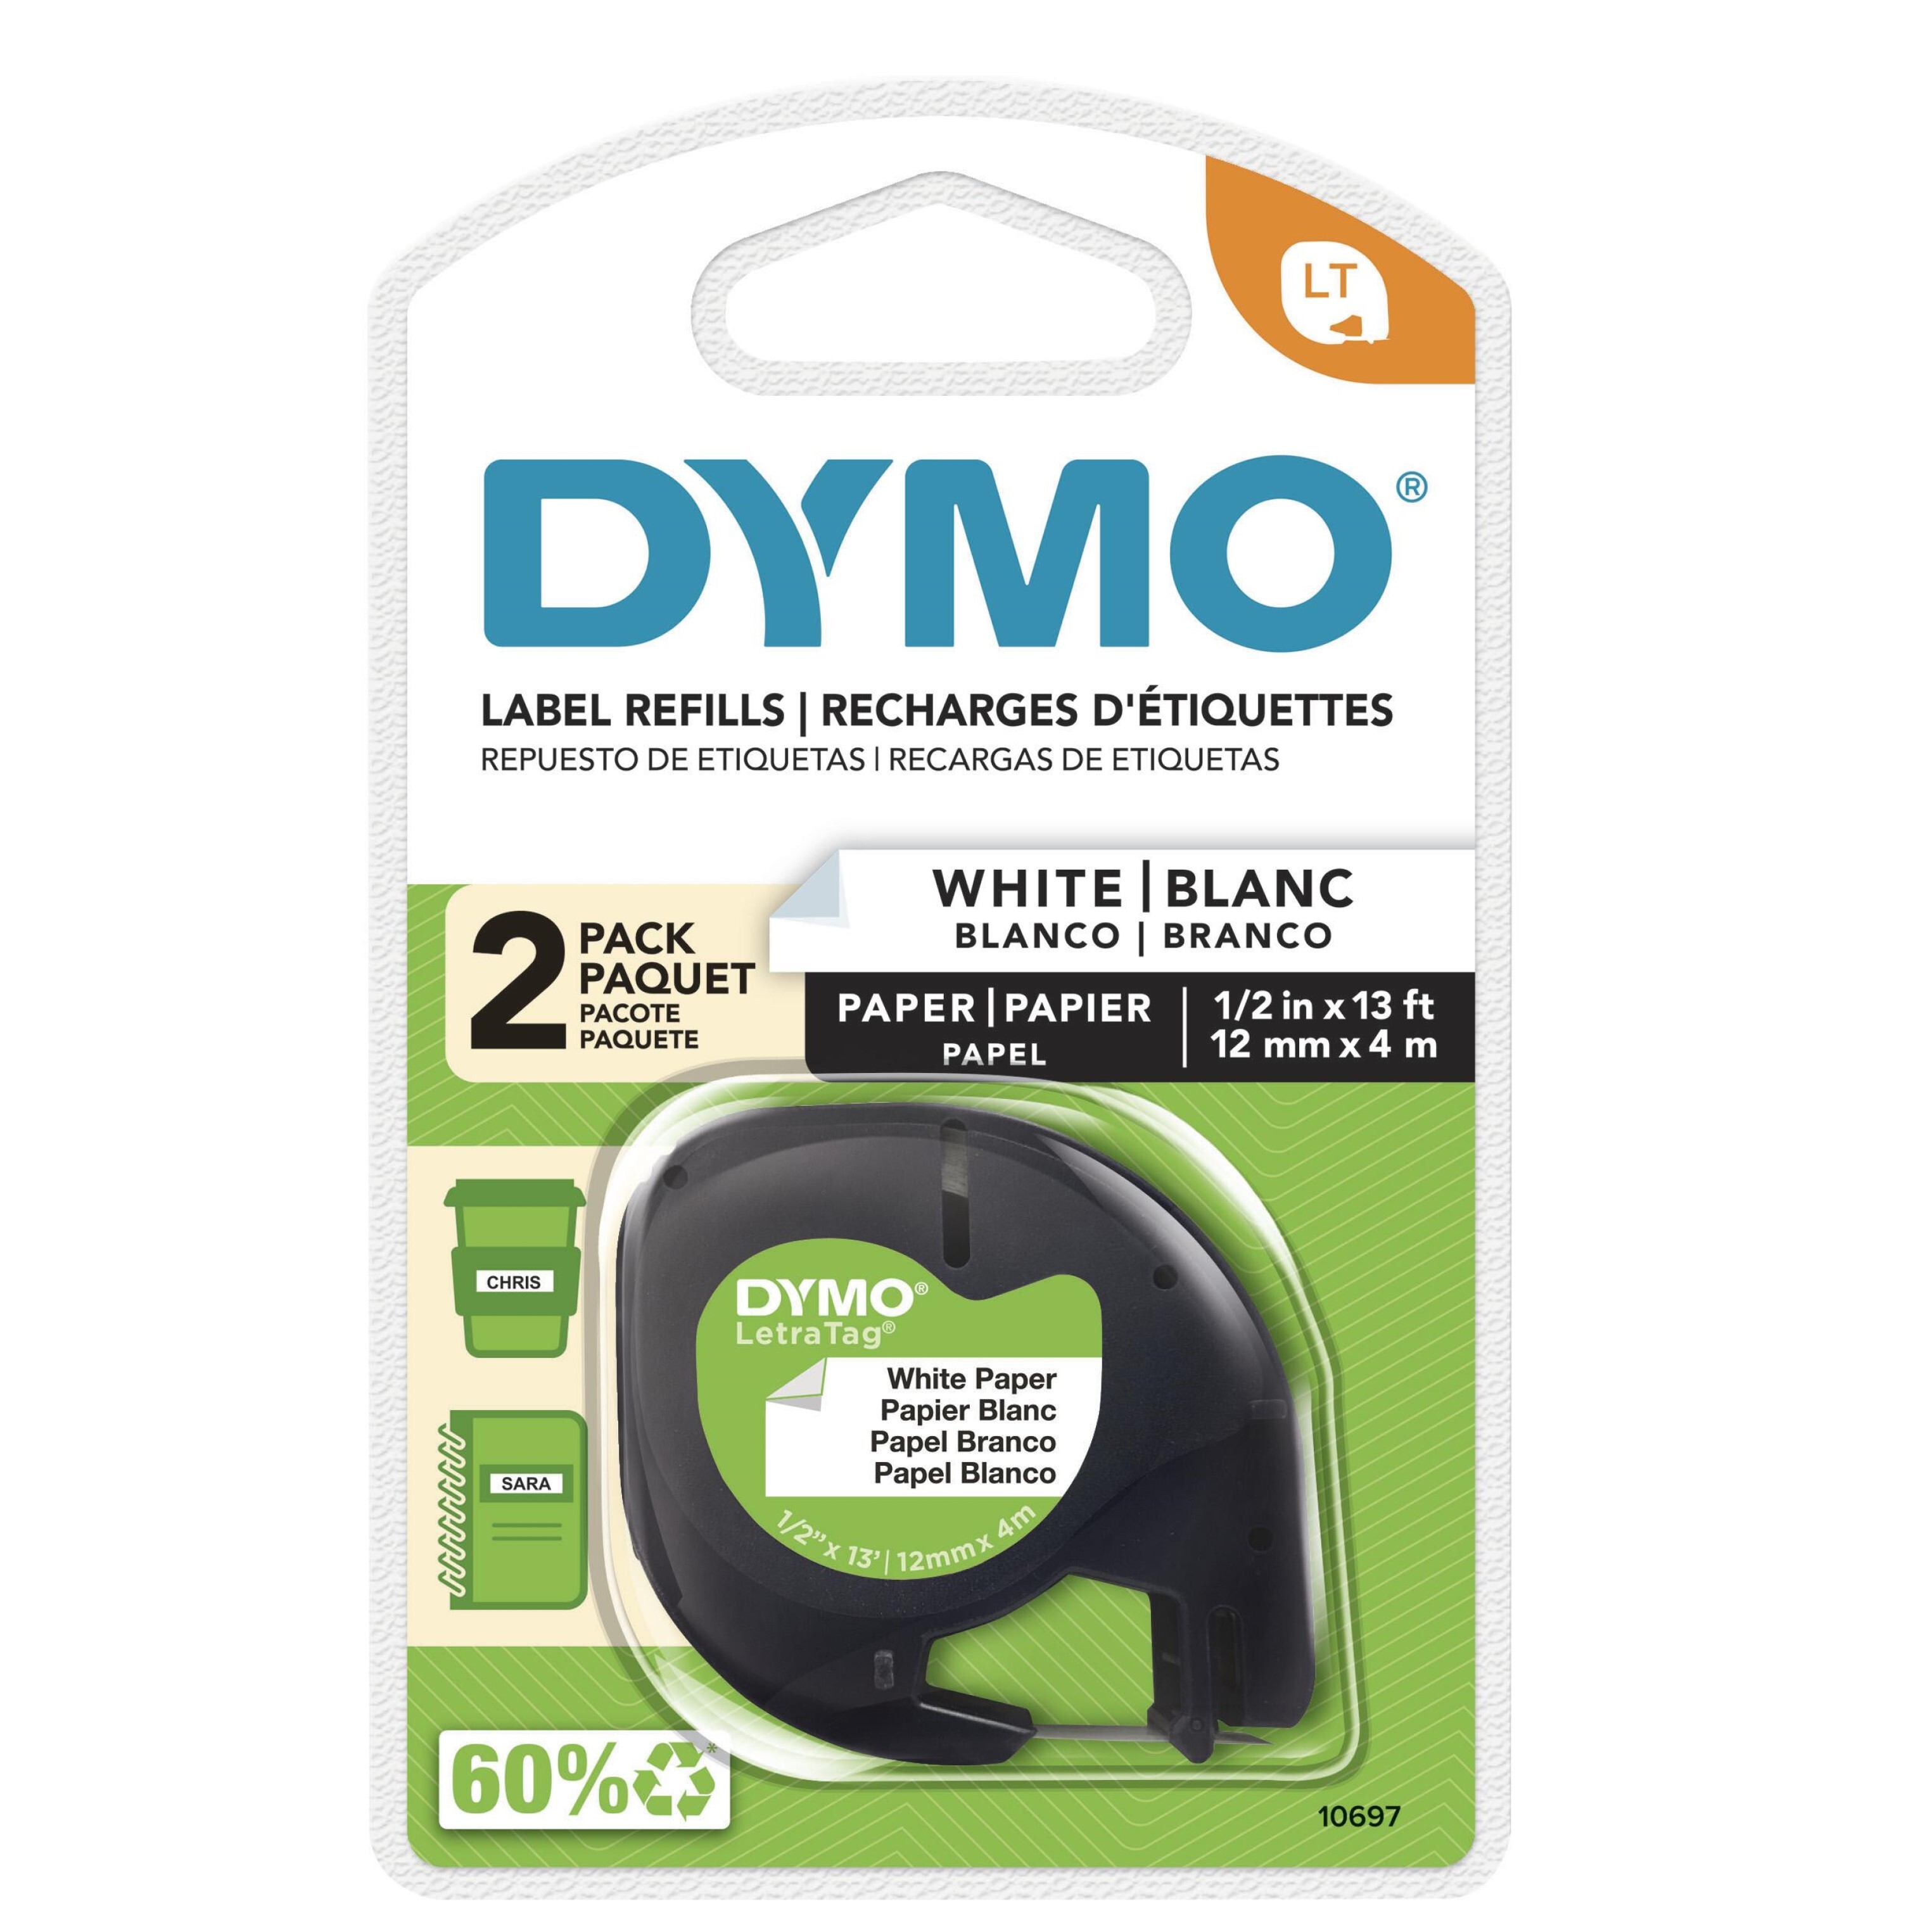 DYMO LT Paper Labels for LetraTag Label Makers, Black Print on White Labels, 1/2-inch x 13-Foot Roll - image 1 of 13